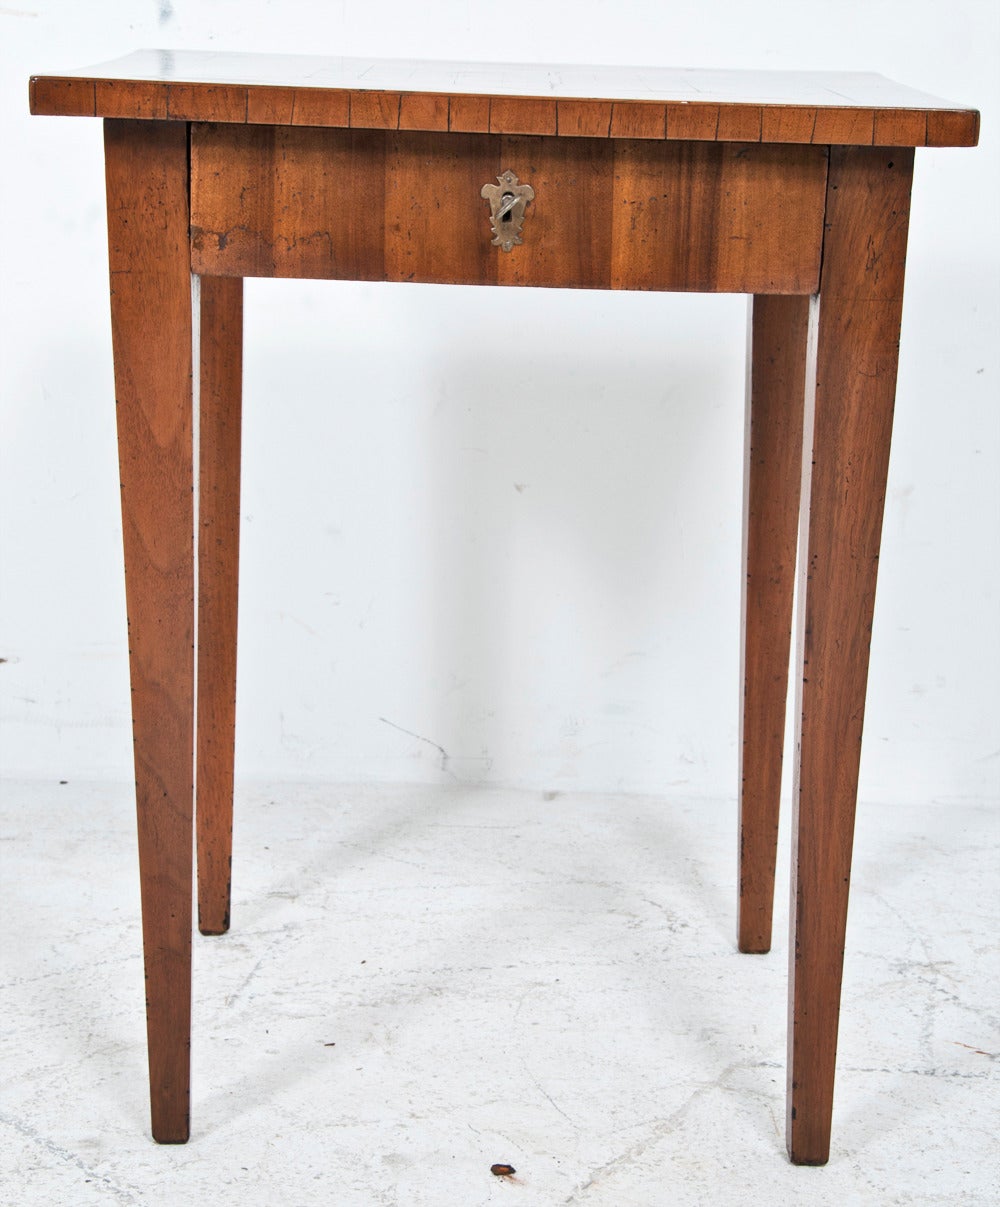 This charming and useful table was made in Italy during the first part of the 19th century. It has wonderful warm fruitwood inlays, a game board inlaid in the top and a drawer in the frieze. Standing on square tapered legs, this table is finished on